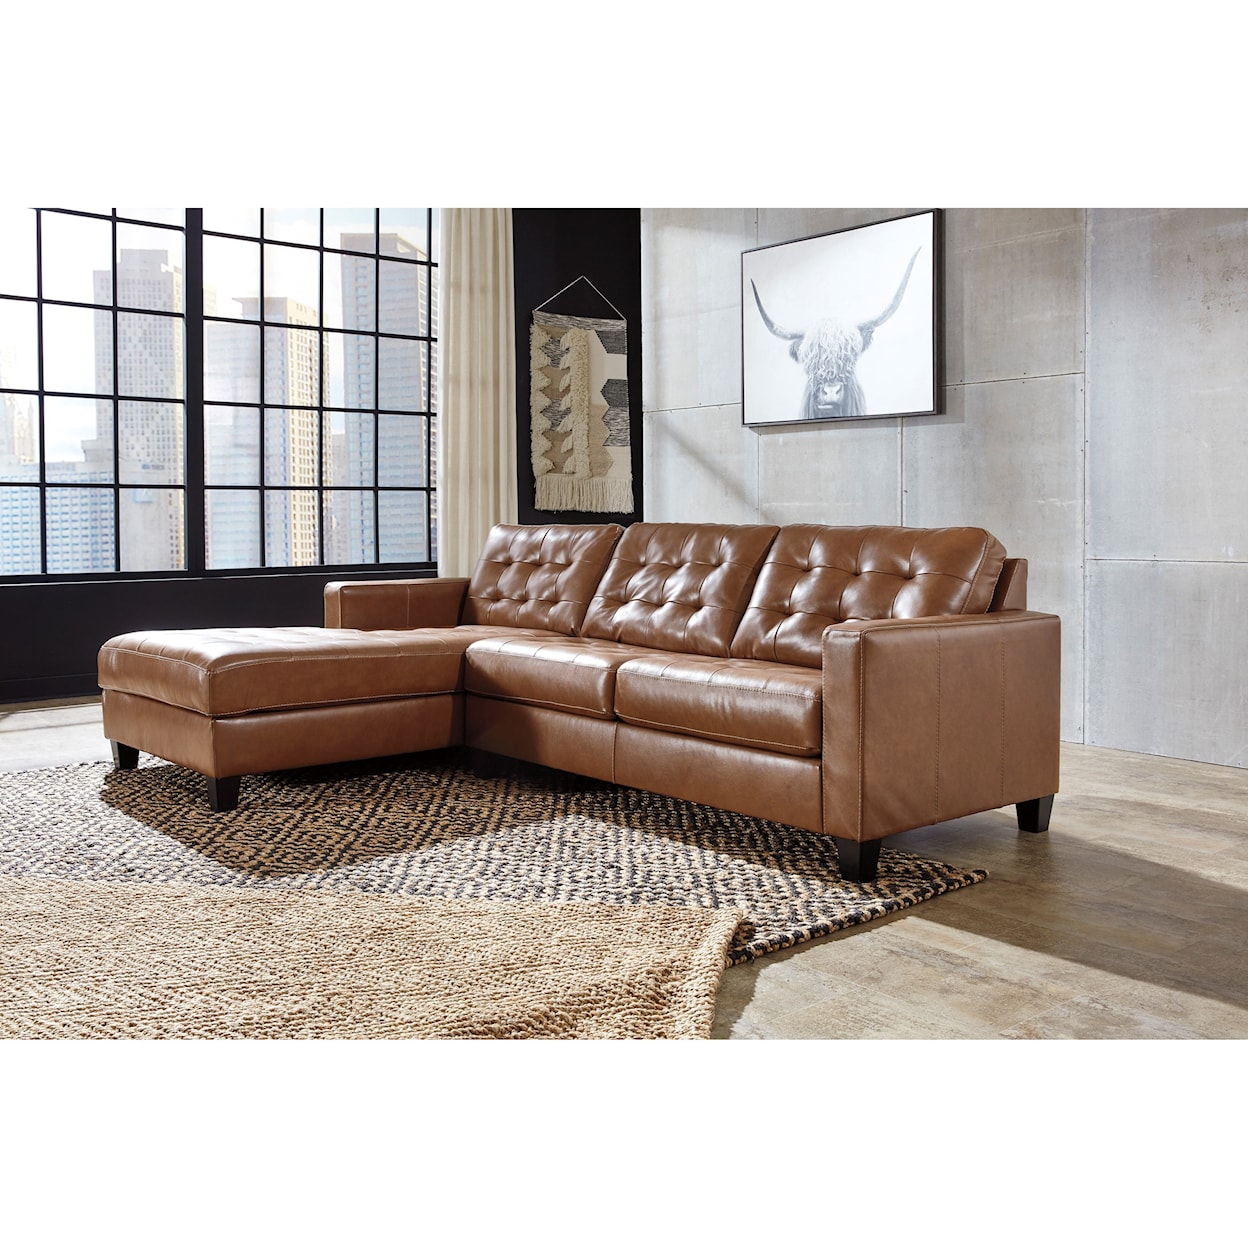 Signature Design by Ashley Baskove Sectional